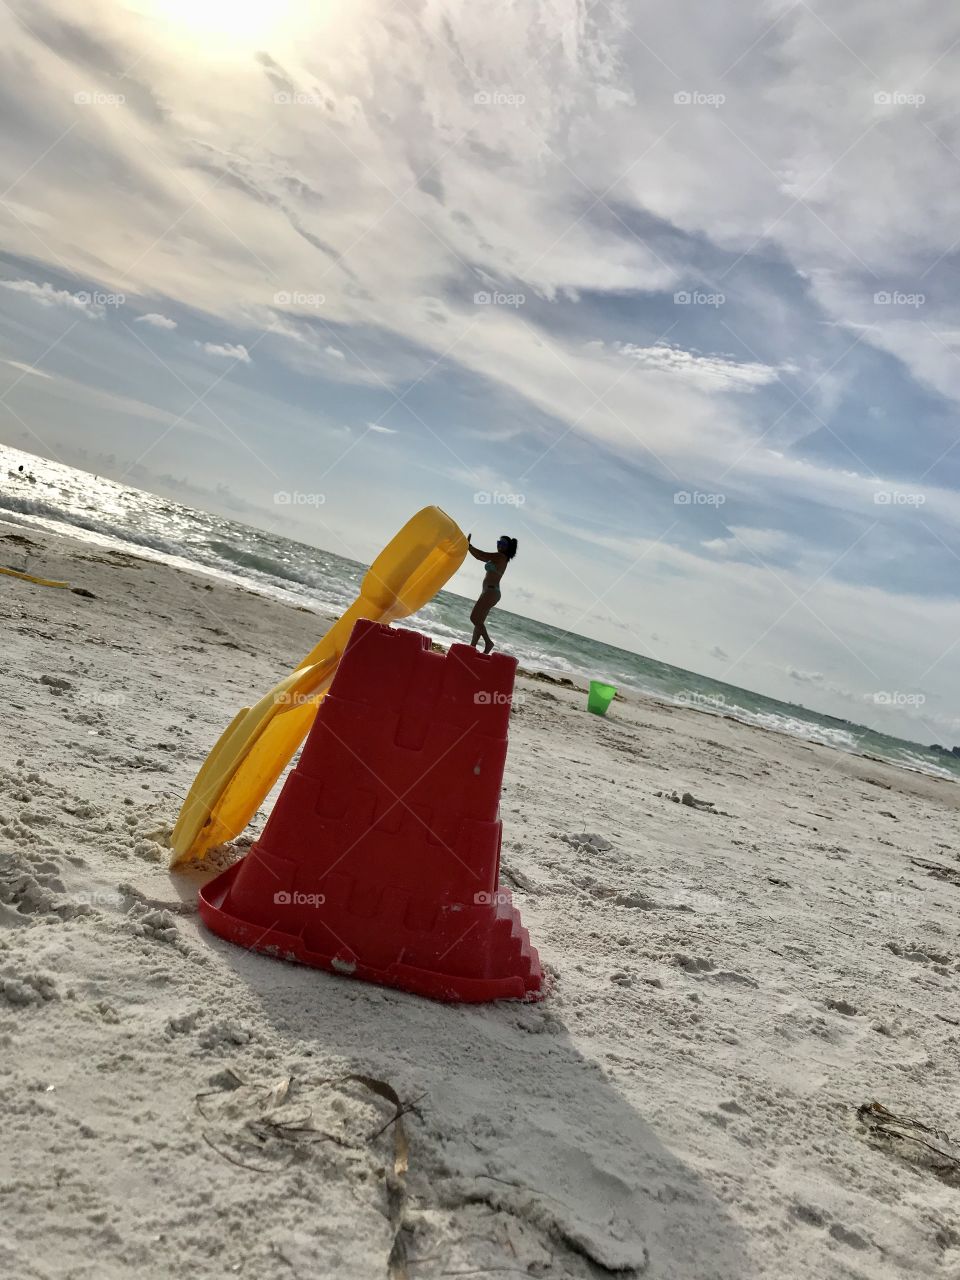 I am not small, I am Travel sized! Miniature me with optical illusion trick in St Pete Beach. Illusions, optics, beach, sand, summer, vacation, travel, creative, ocean, freedom, outdoors, adventure 